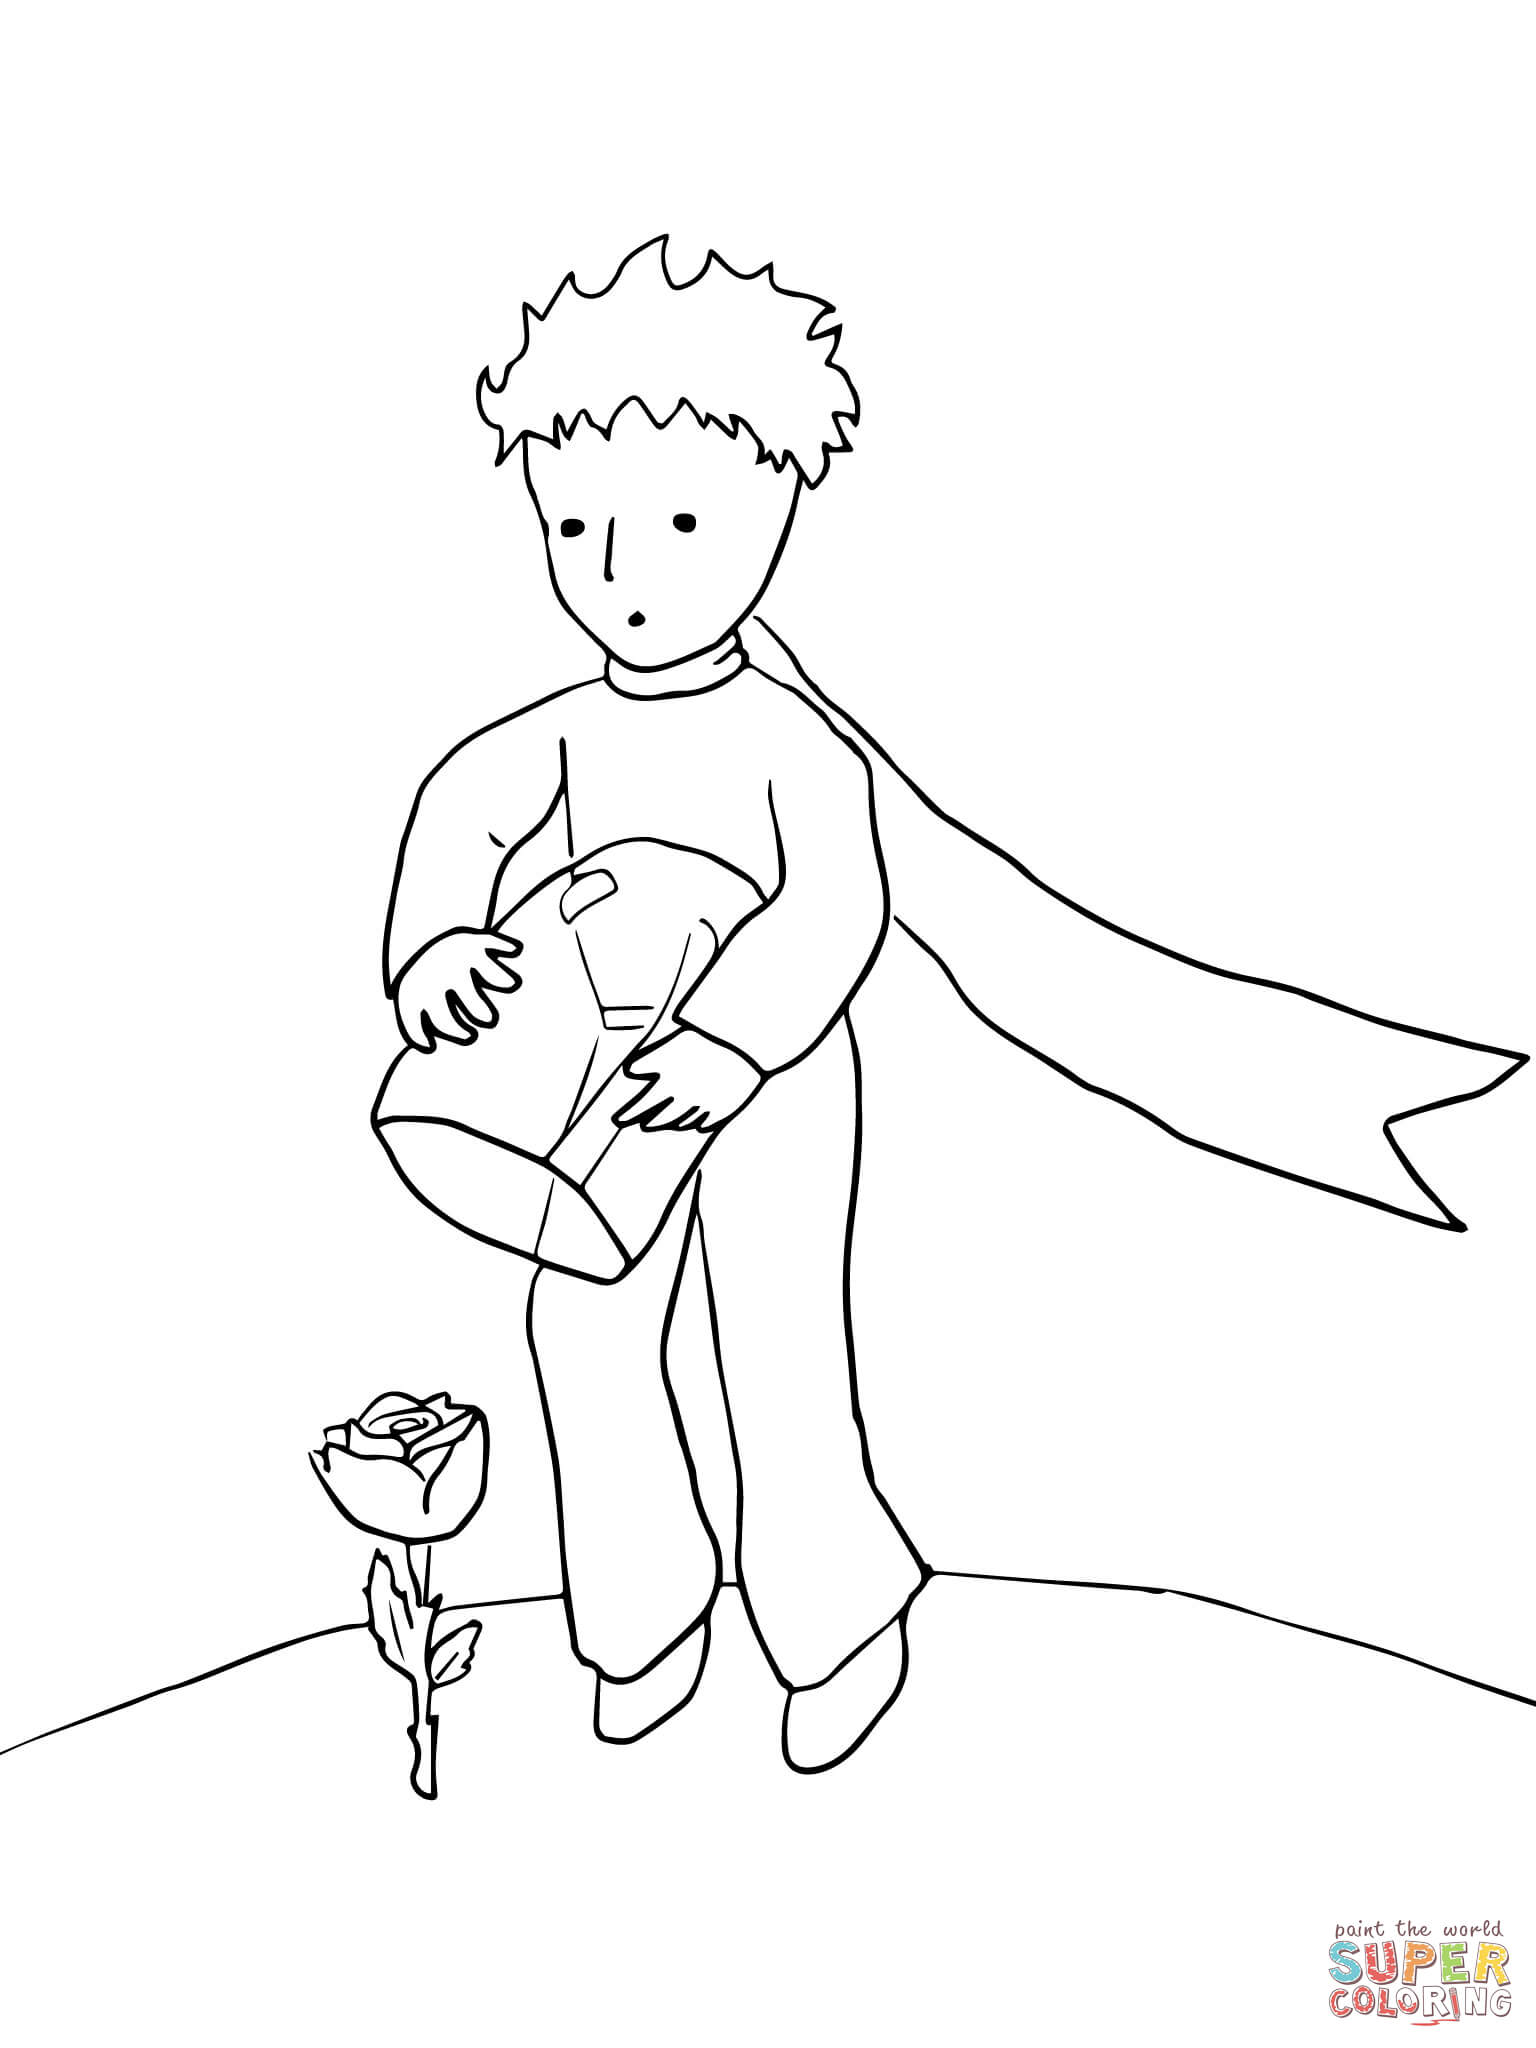 Little Prince coloring pages | Free Coloring Pages